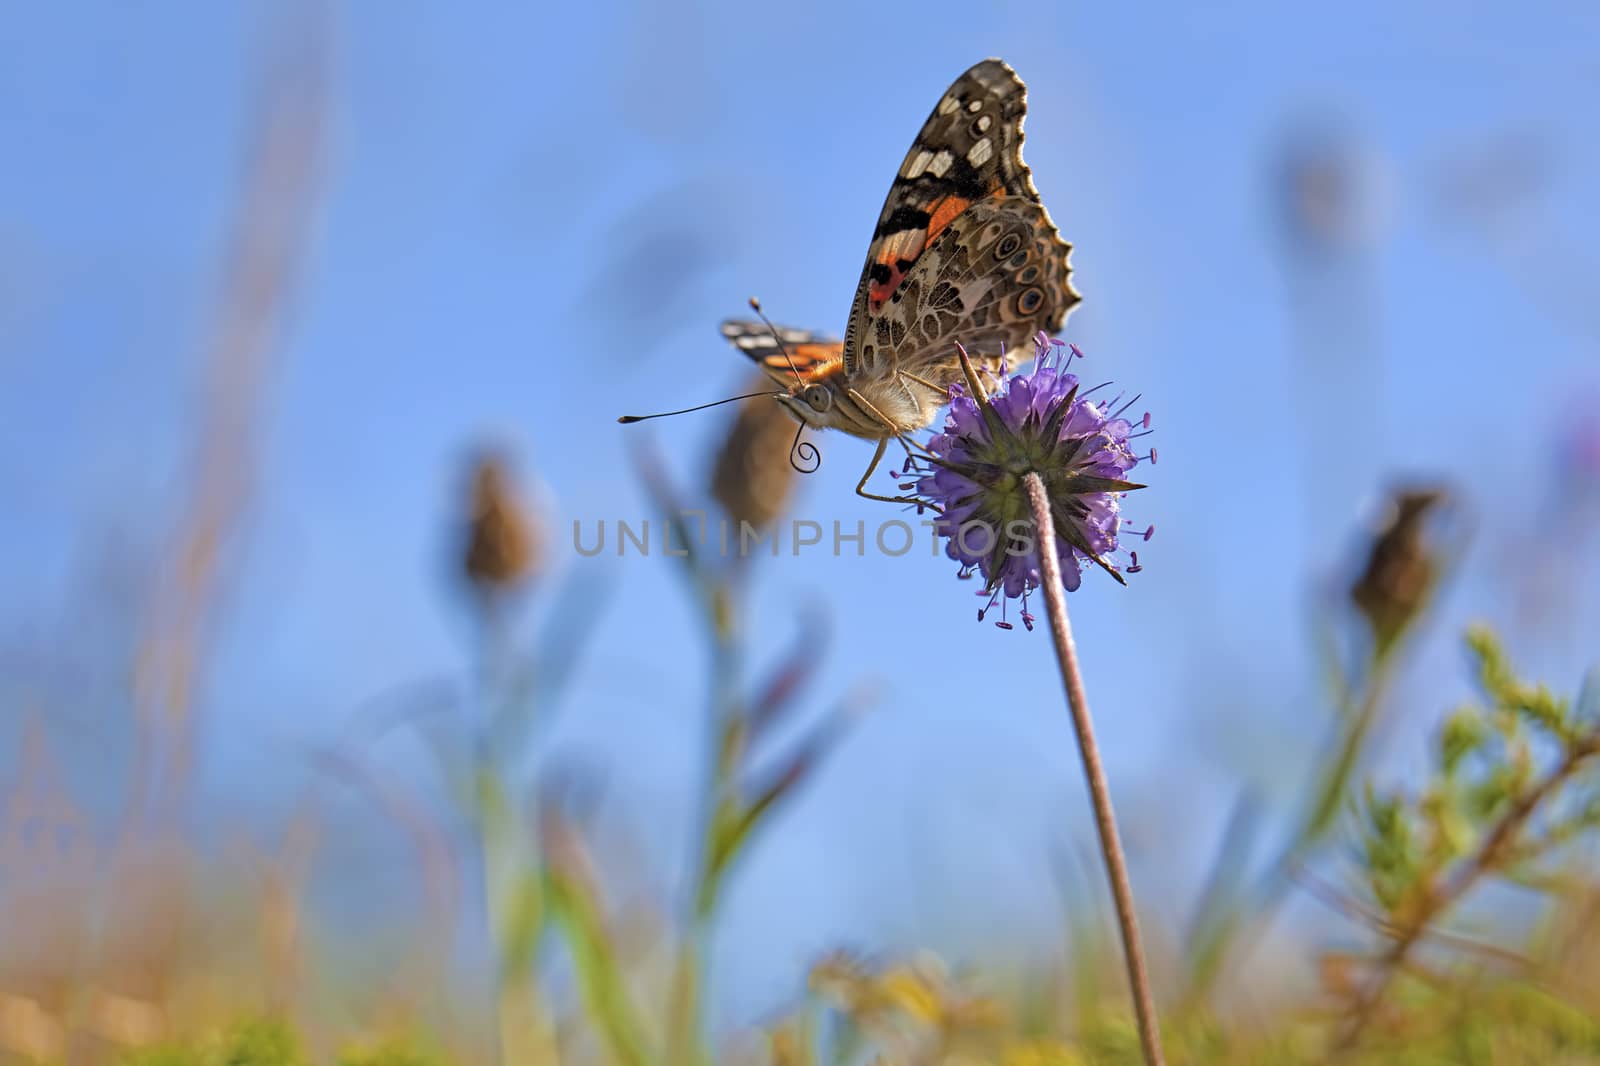 Painted Lady butterfly on a brown ray knapweed